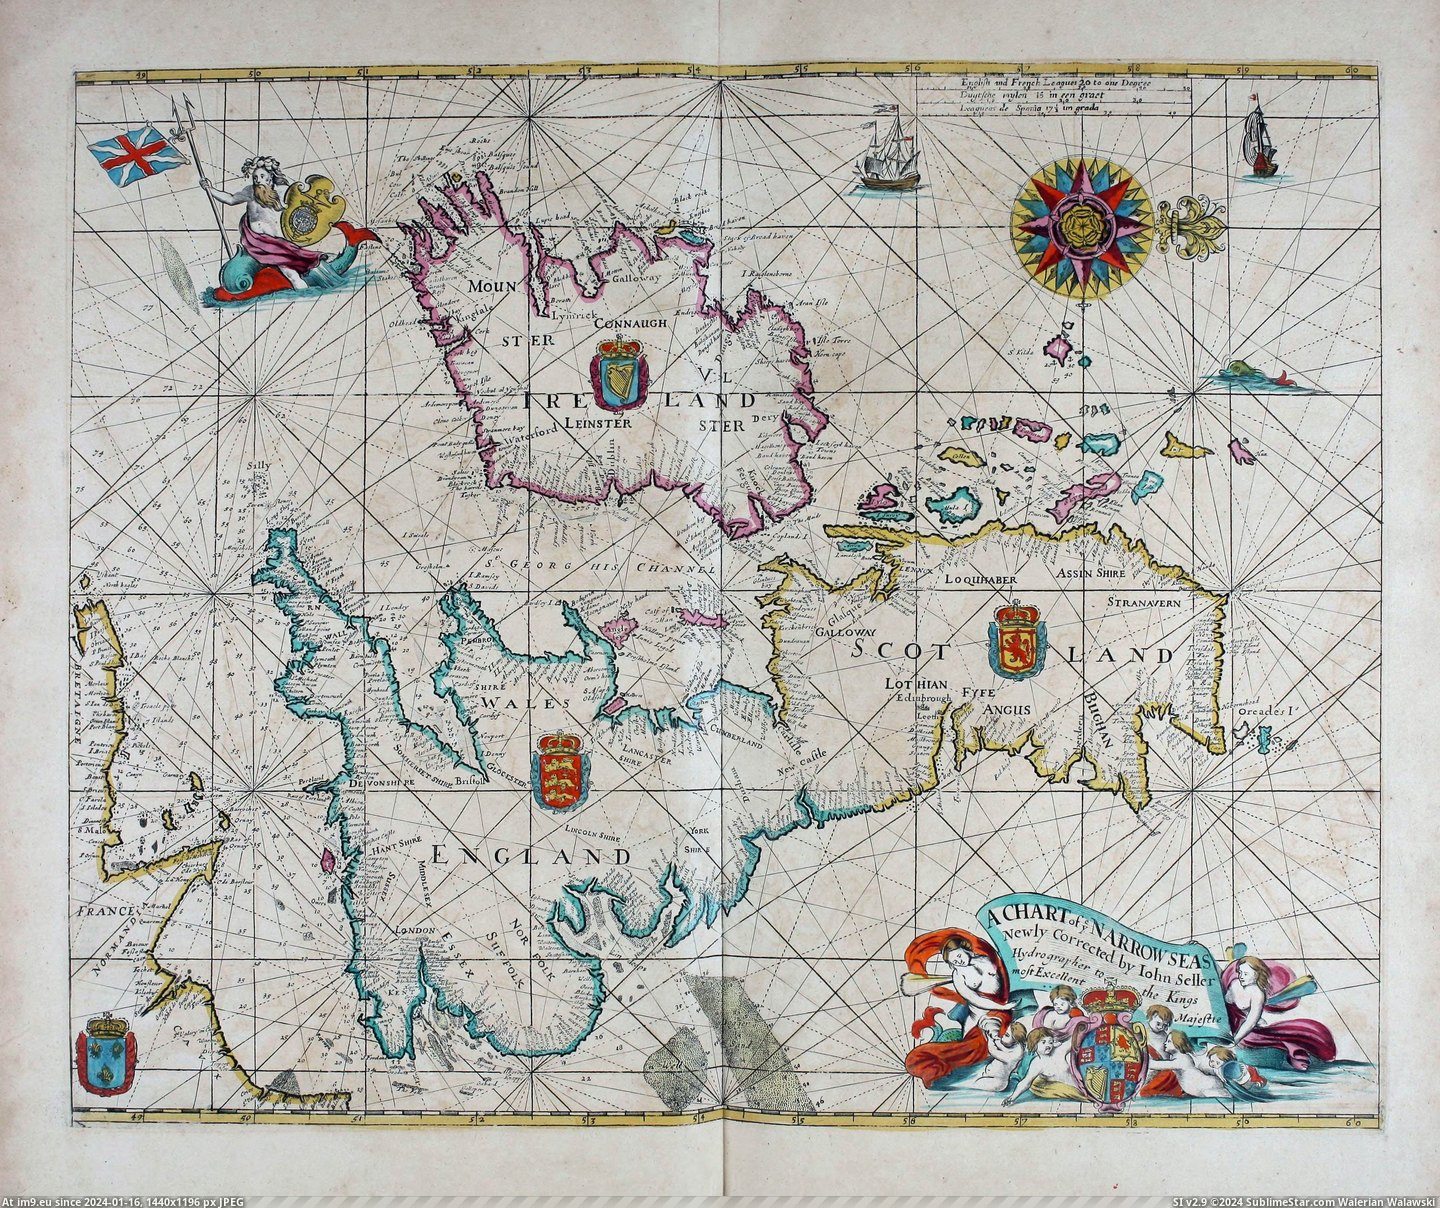 #King #John #Narrow #Seller #Chart #Detailed [Mapporn] A Detailed Navigation Chart Of The Narrow Seas from 1672 - By John Seller, The King's Hydrographer [4061x3384] Pic. (Image of album My r/MAPS favs))